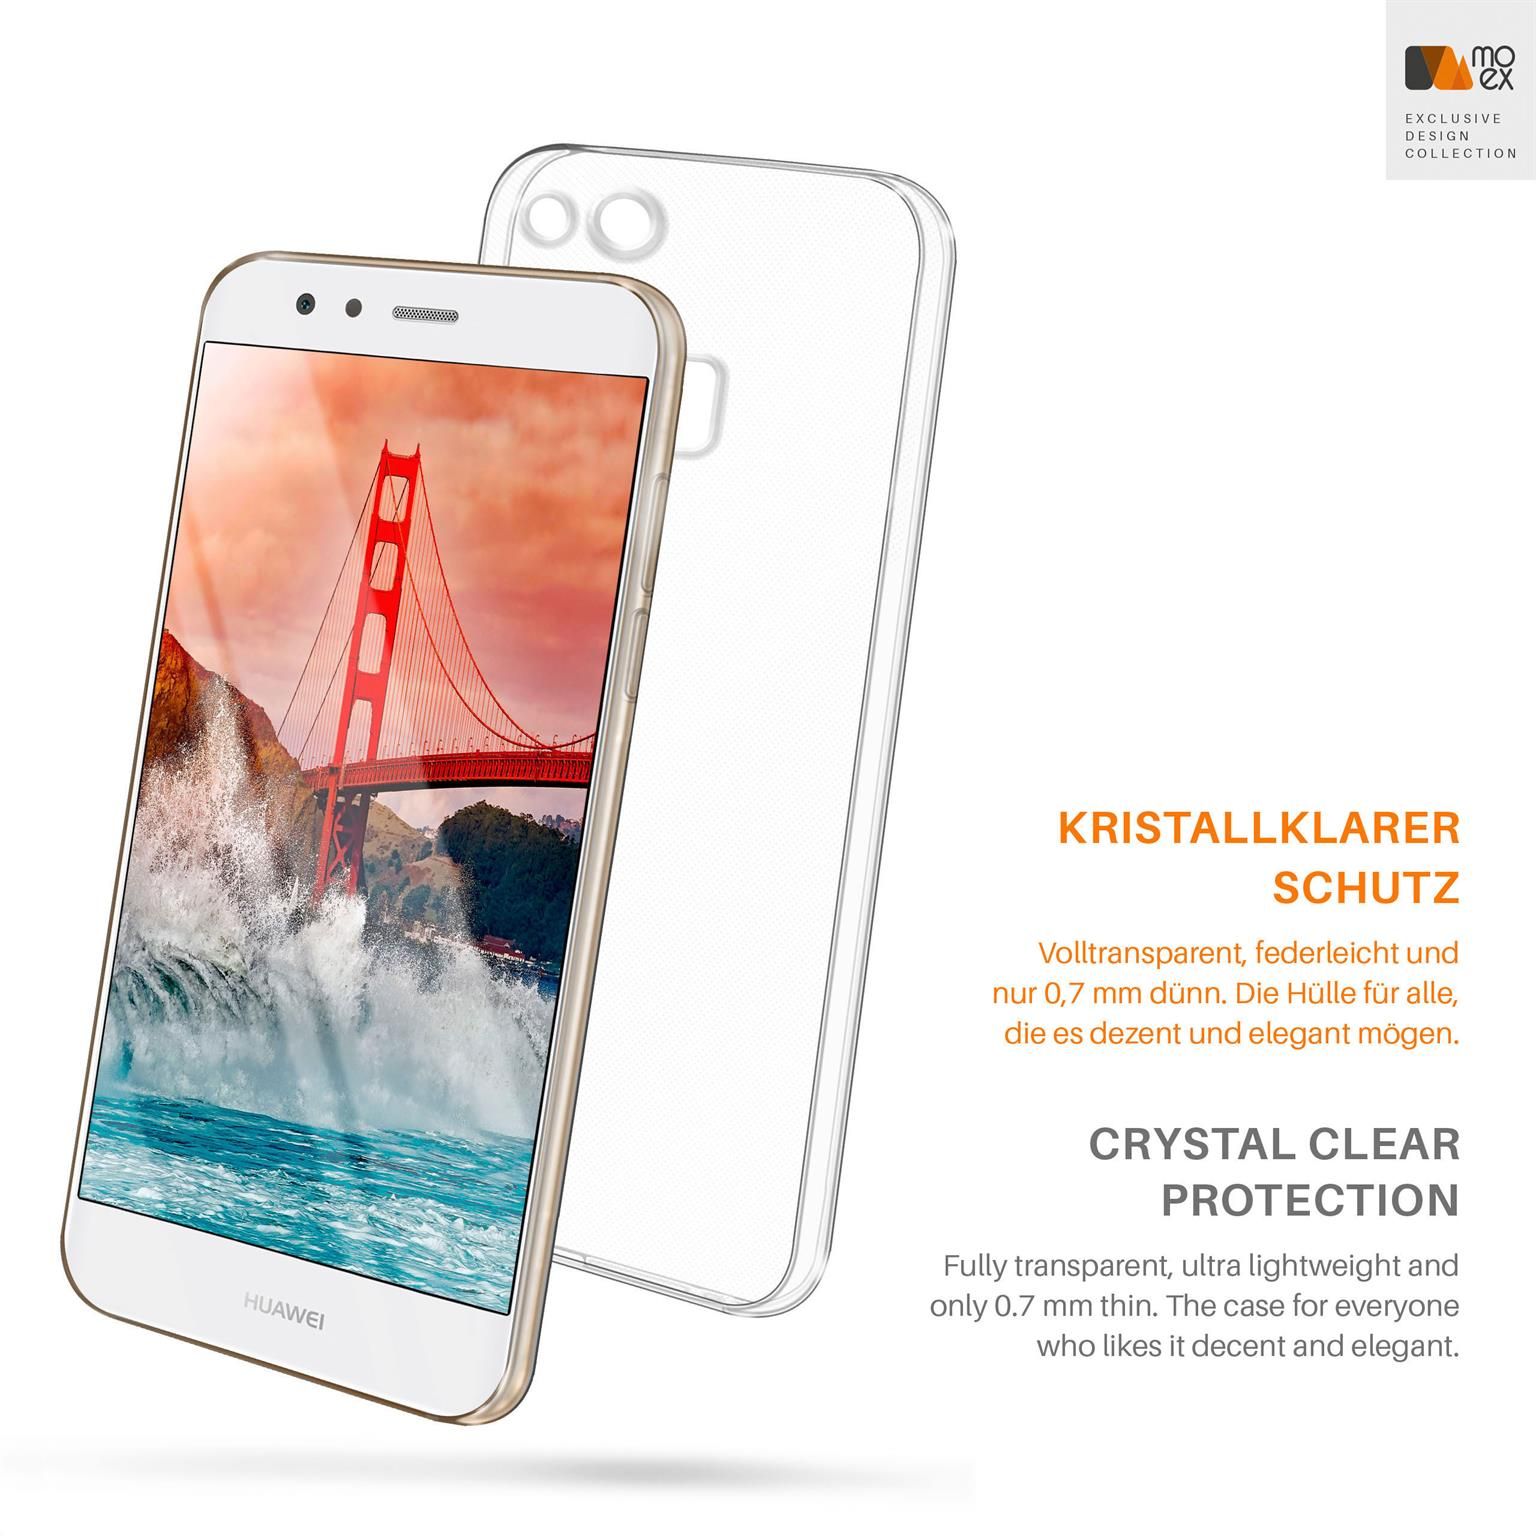 MOEX Backcover, Lite, Aero P10 Crystal-Clear Case, Huawei,